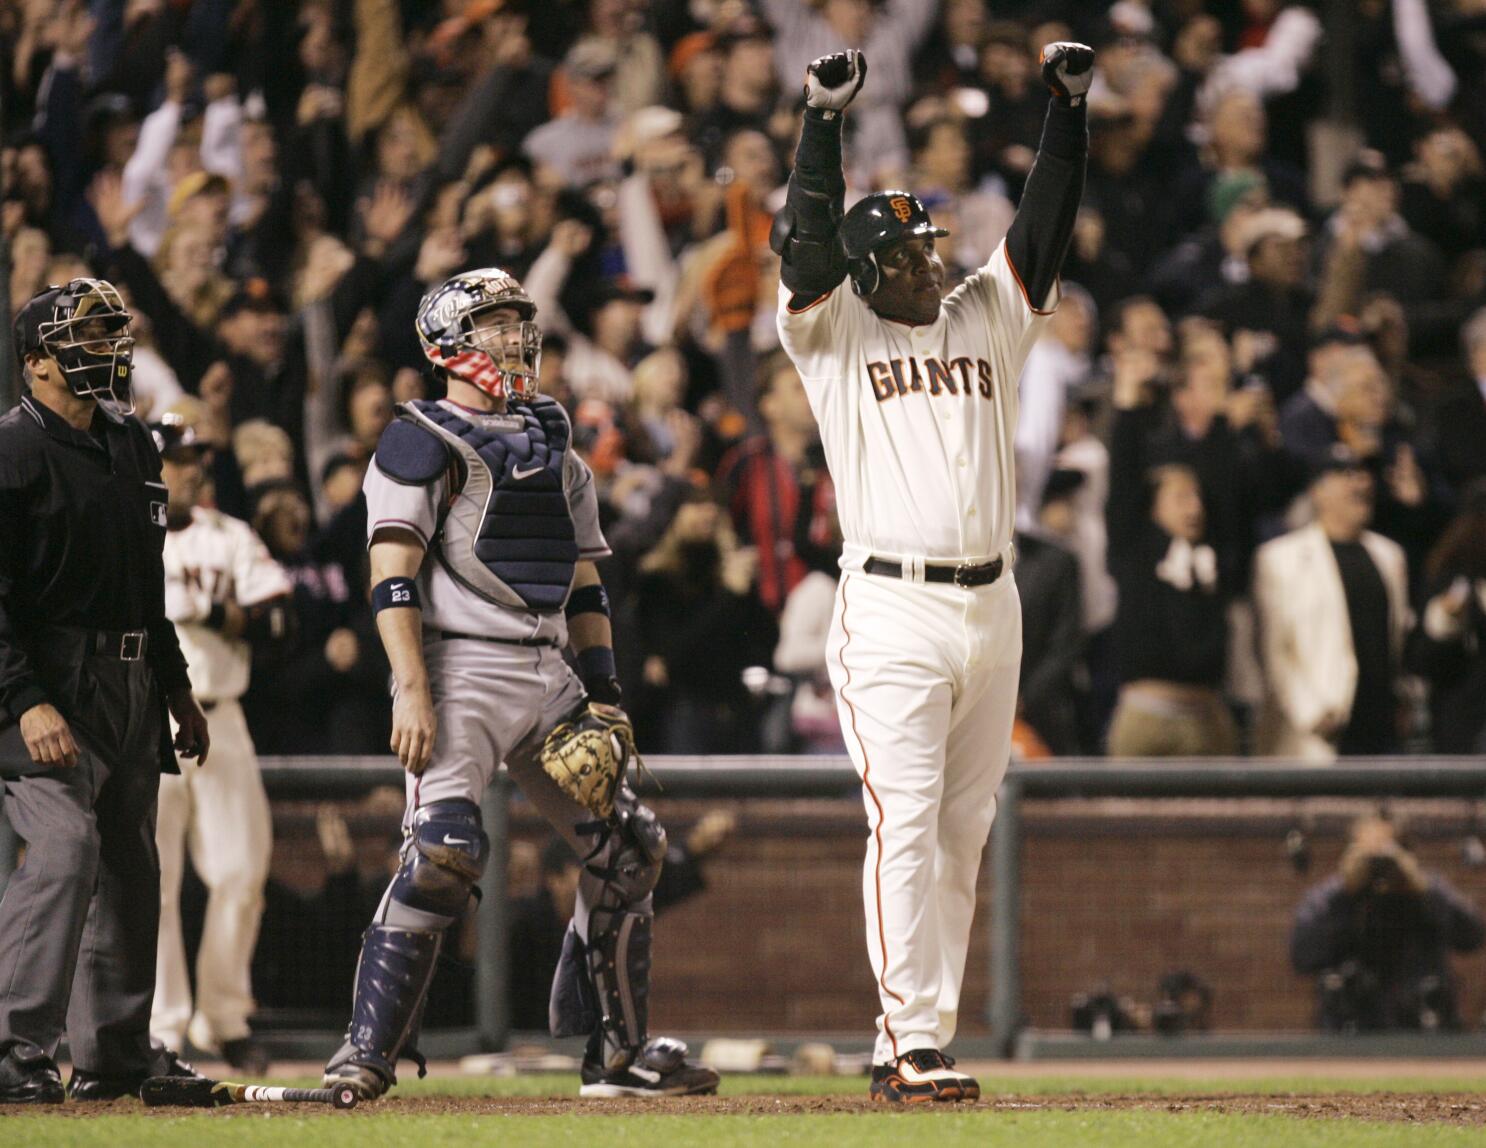 Barry Bonds not elected to Hall of Fame by Contemporary Baseball